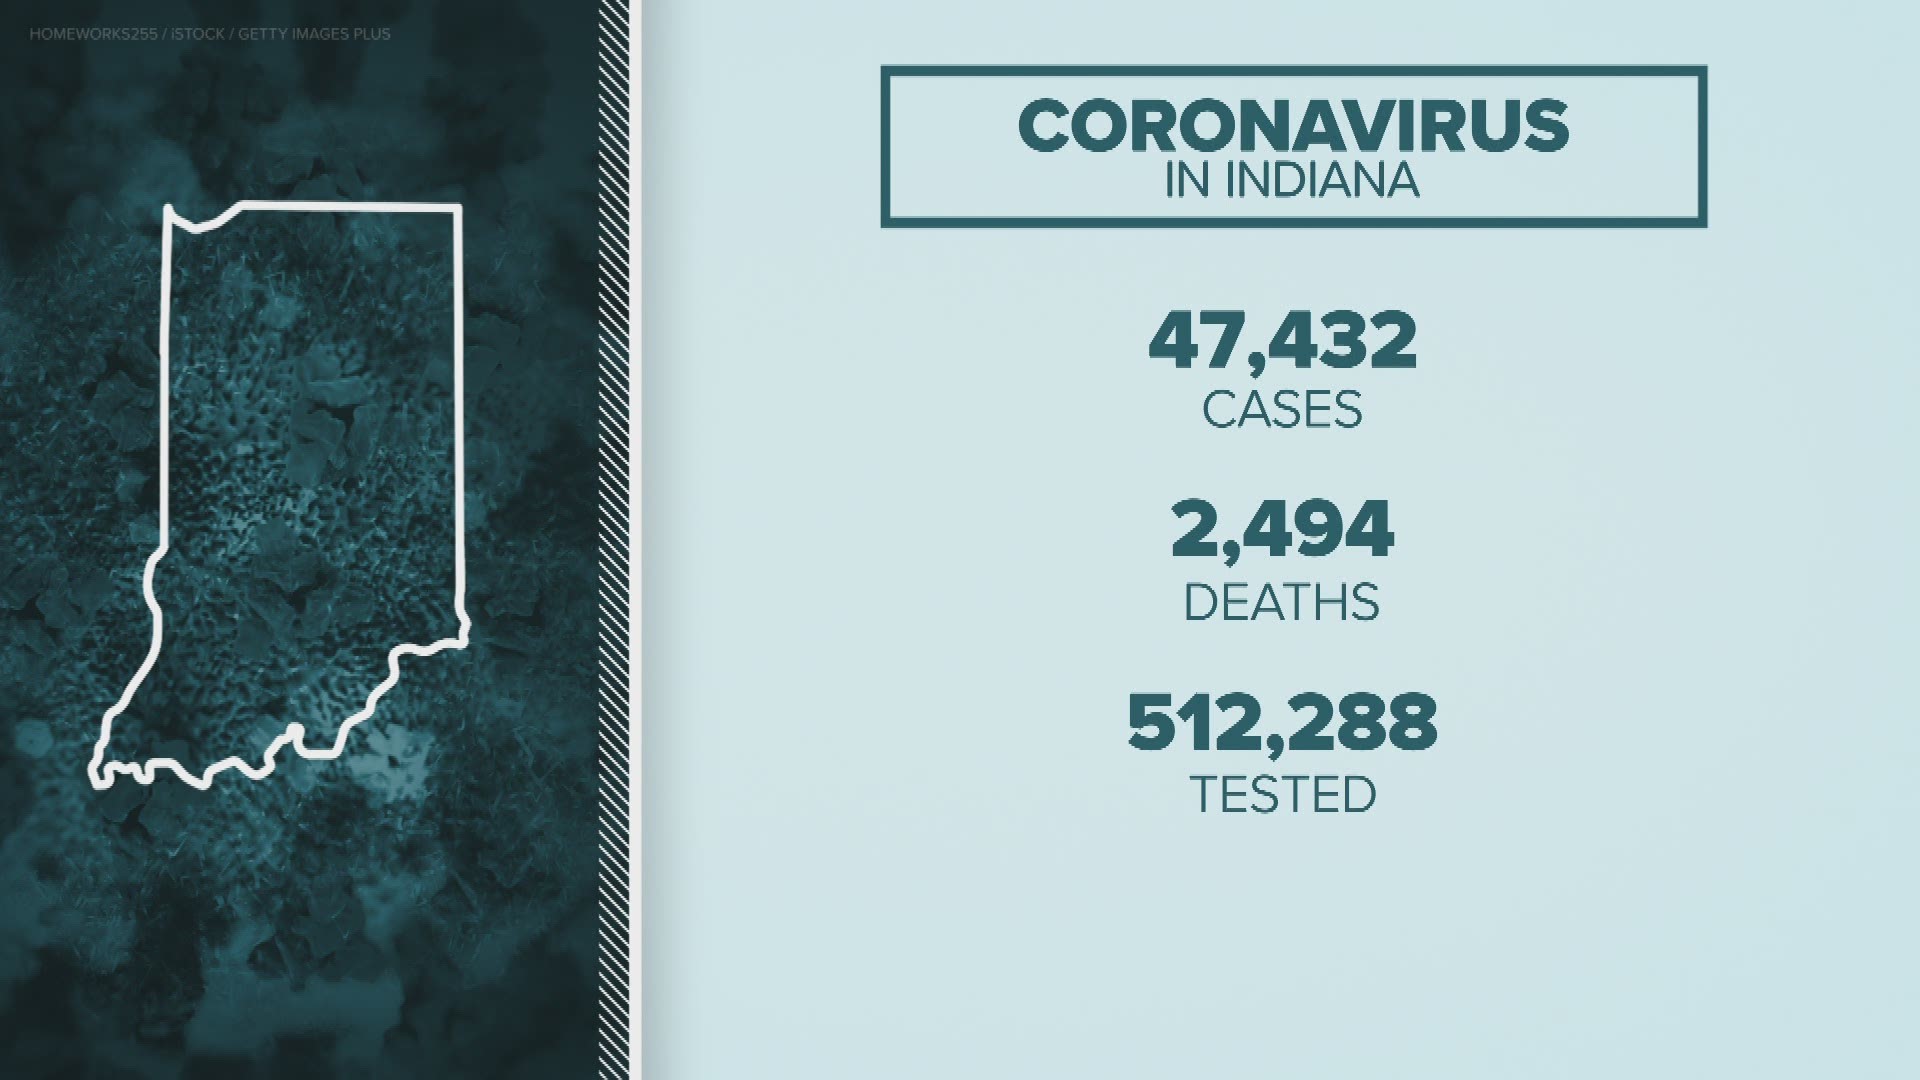 For the second straight day, we've seen more than 500 new positive cases of COVID-19 in Indiana.